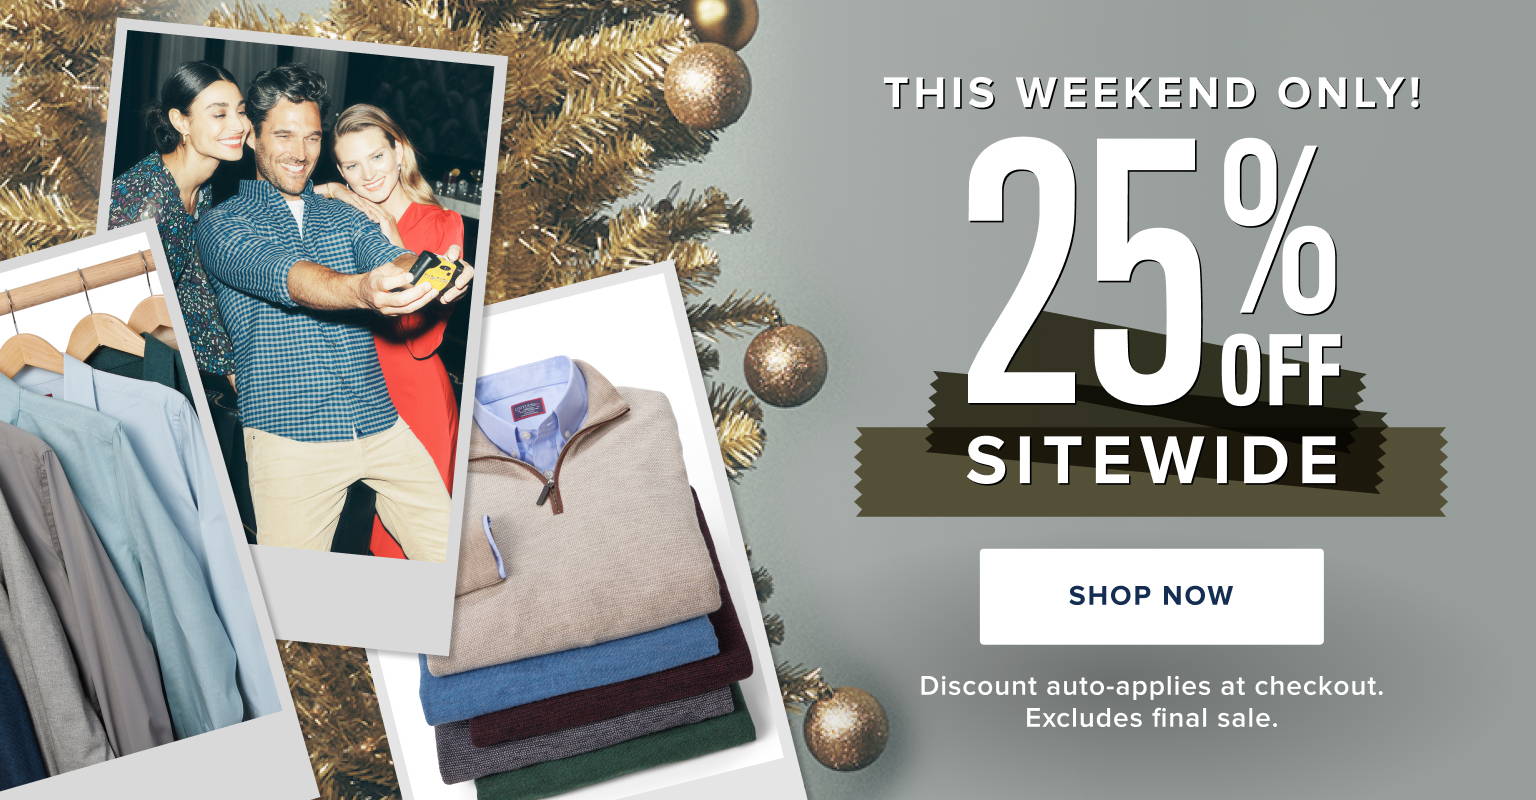 This weekend only! 25%OFF Sitewide. 